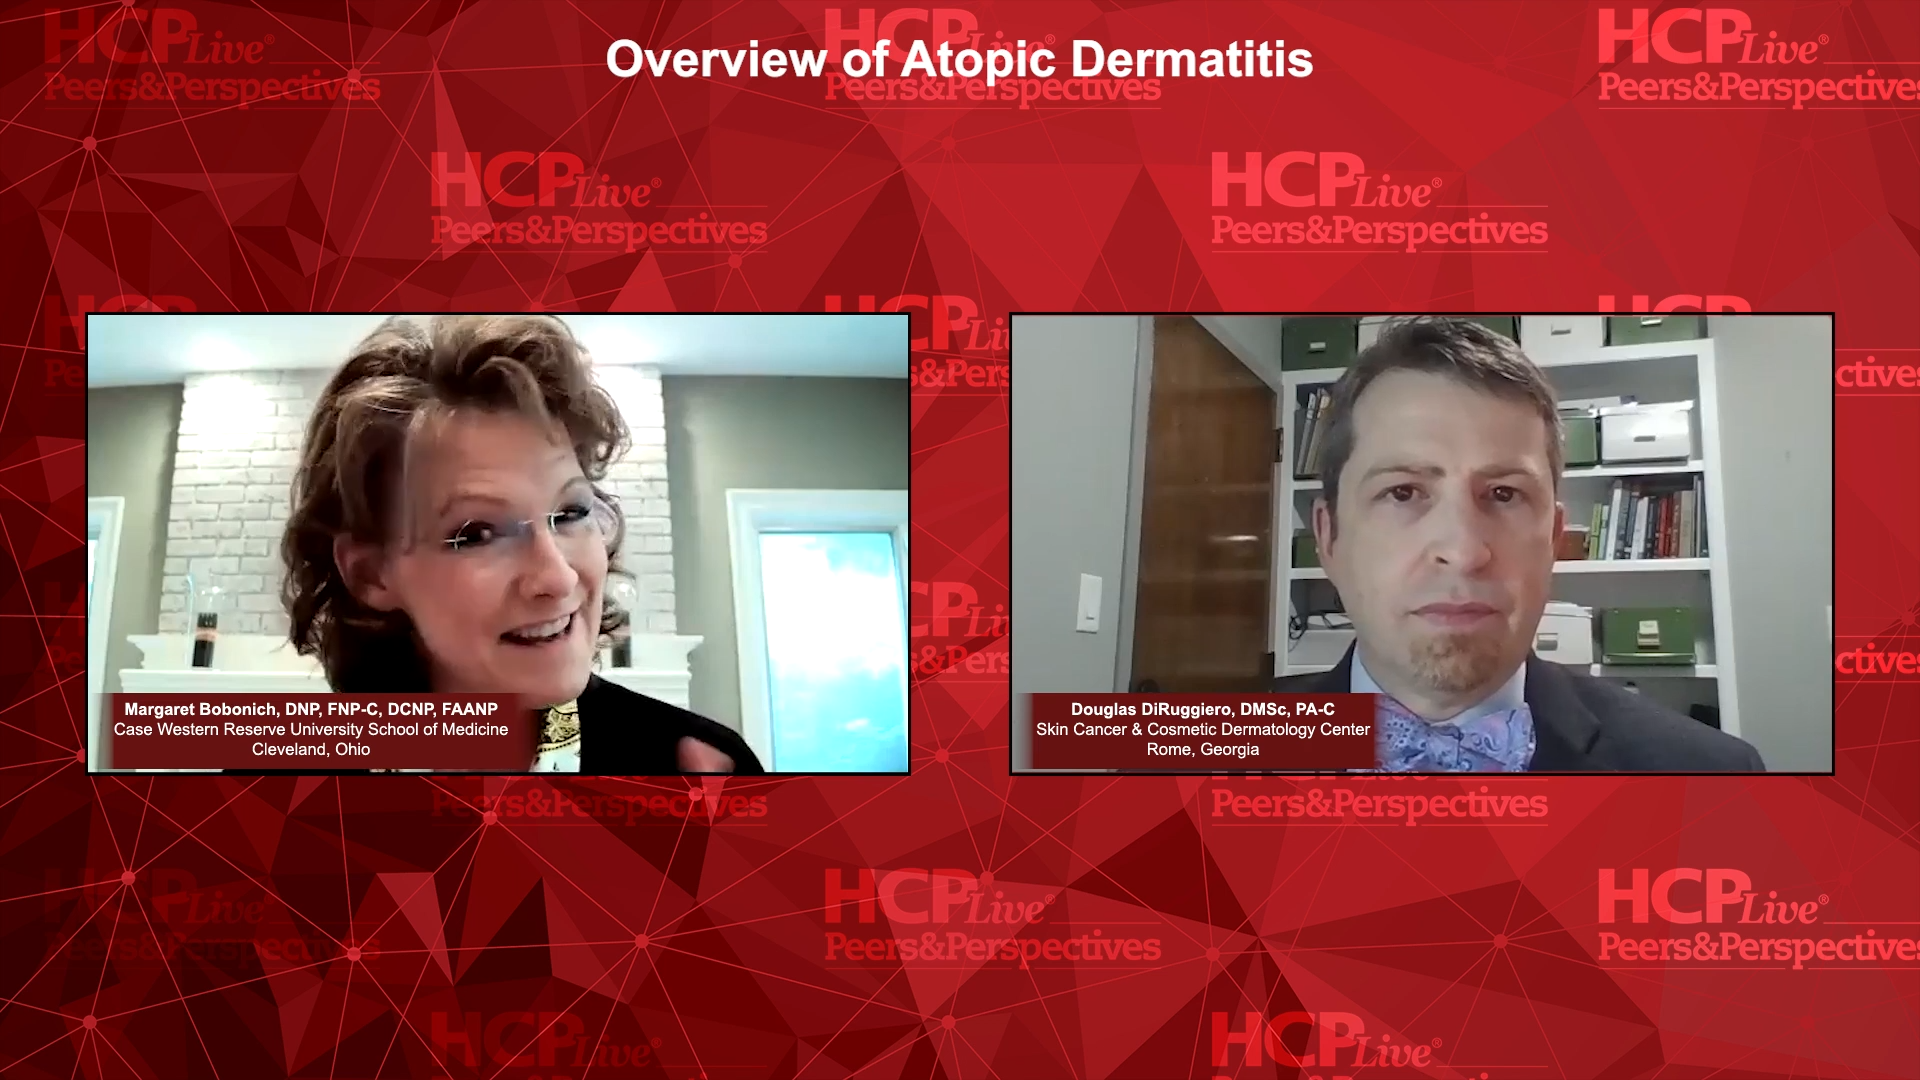 Overview of Atopic Dermatitis